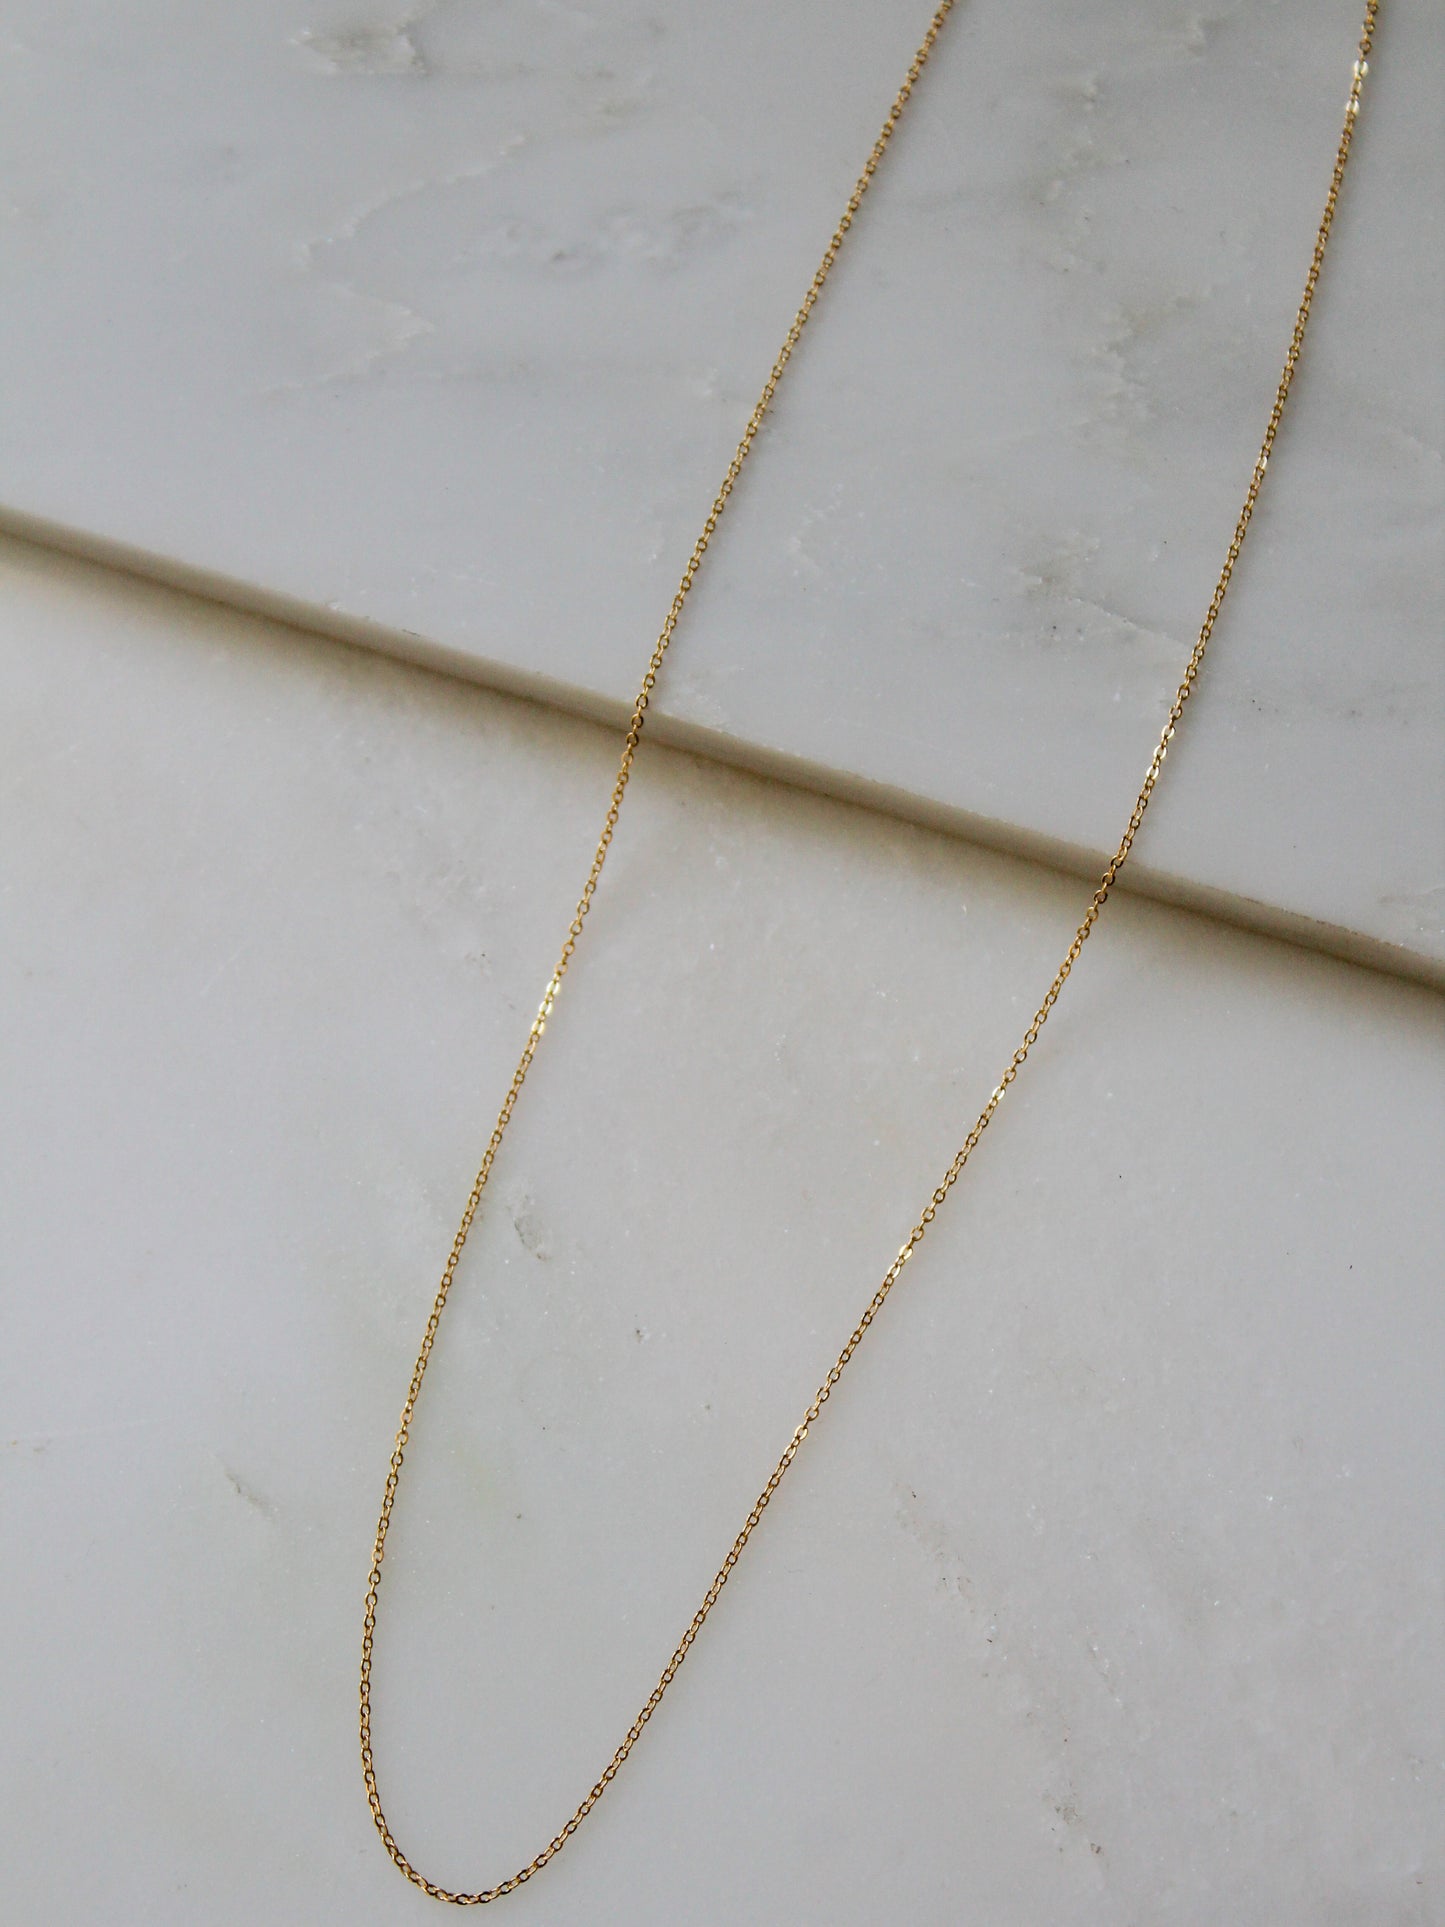 Back to Basics Gold Filled chain